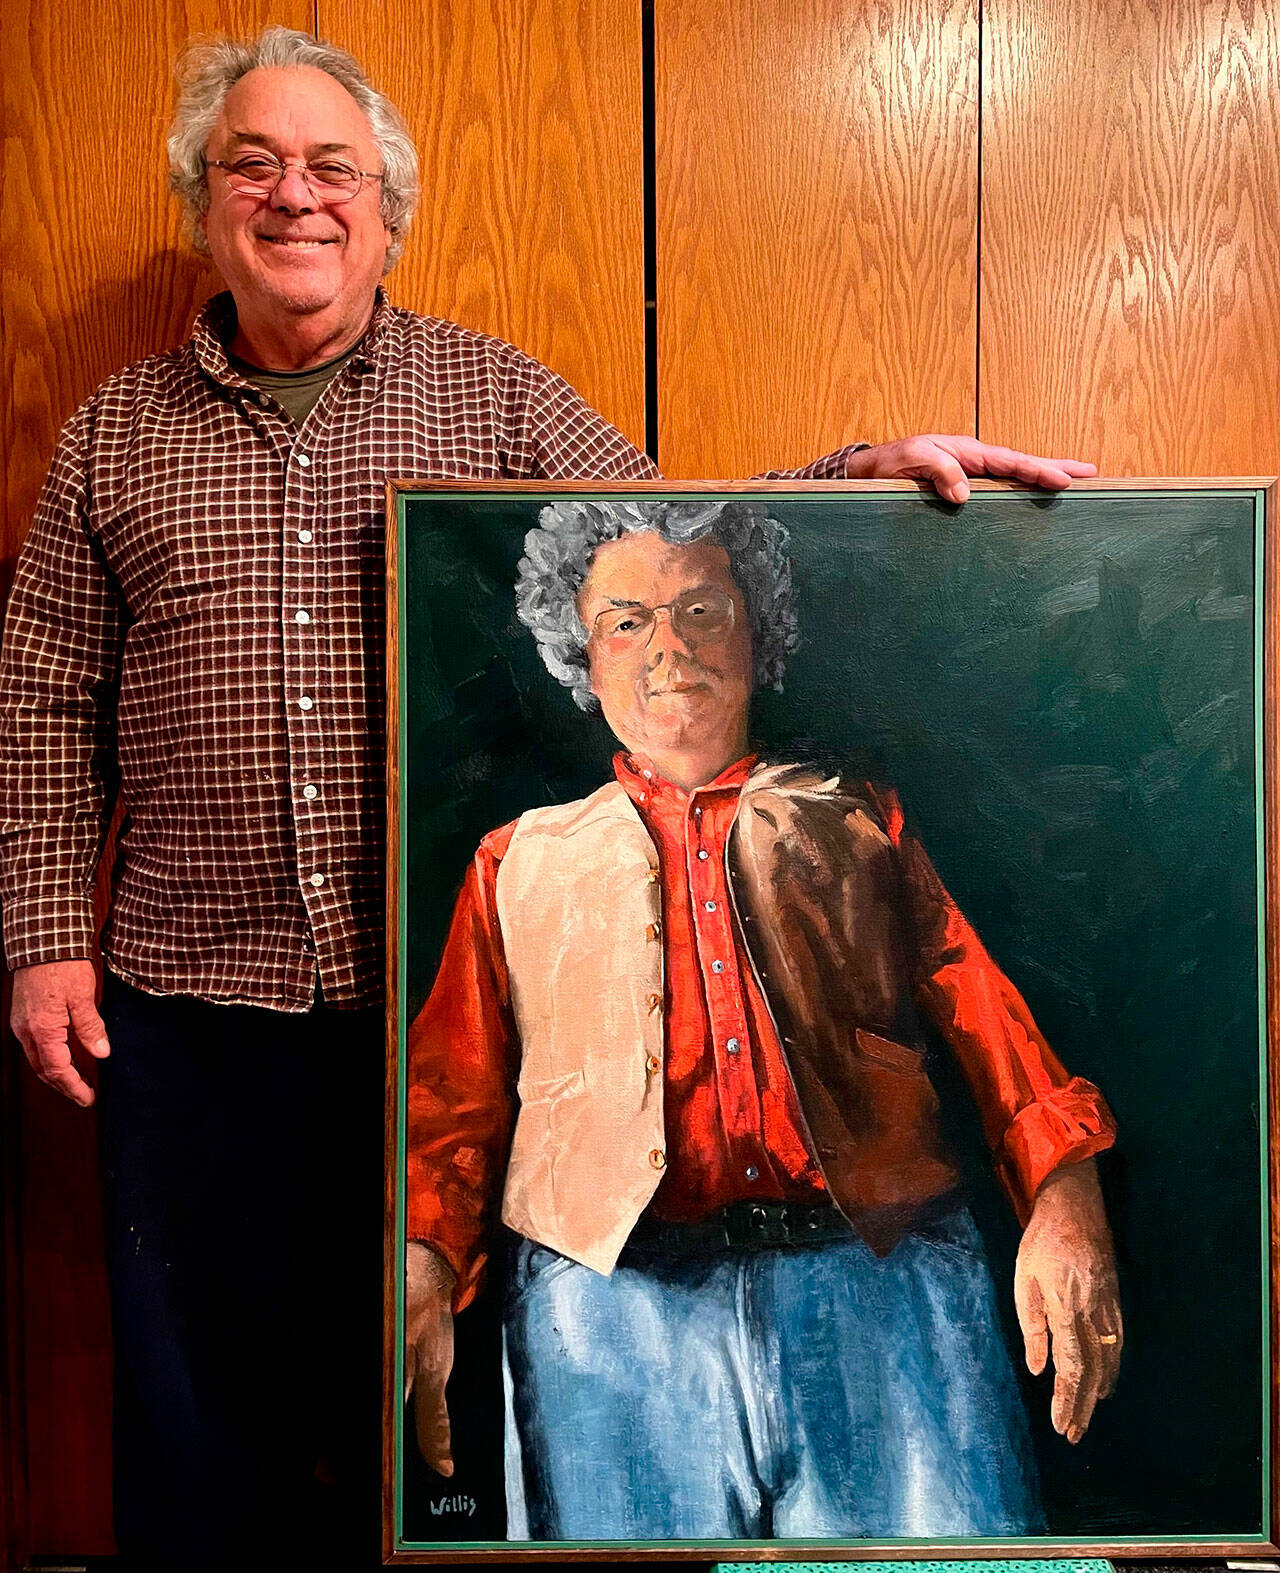 Artist David C. Willis displays “Selfie,” a piece selected for inclusion at the 2022 CVG Show in Bremerton’s Collective Visions Gallery. Submitted photo